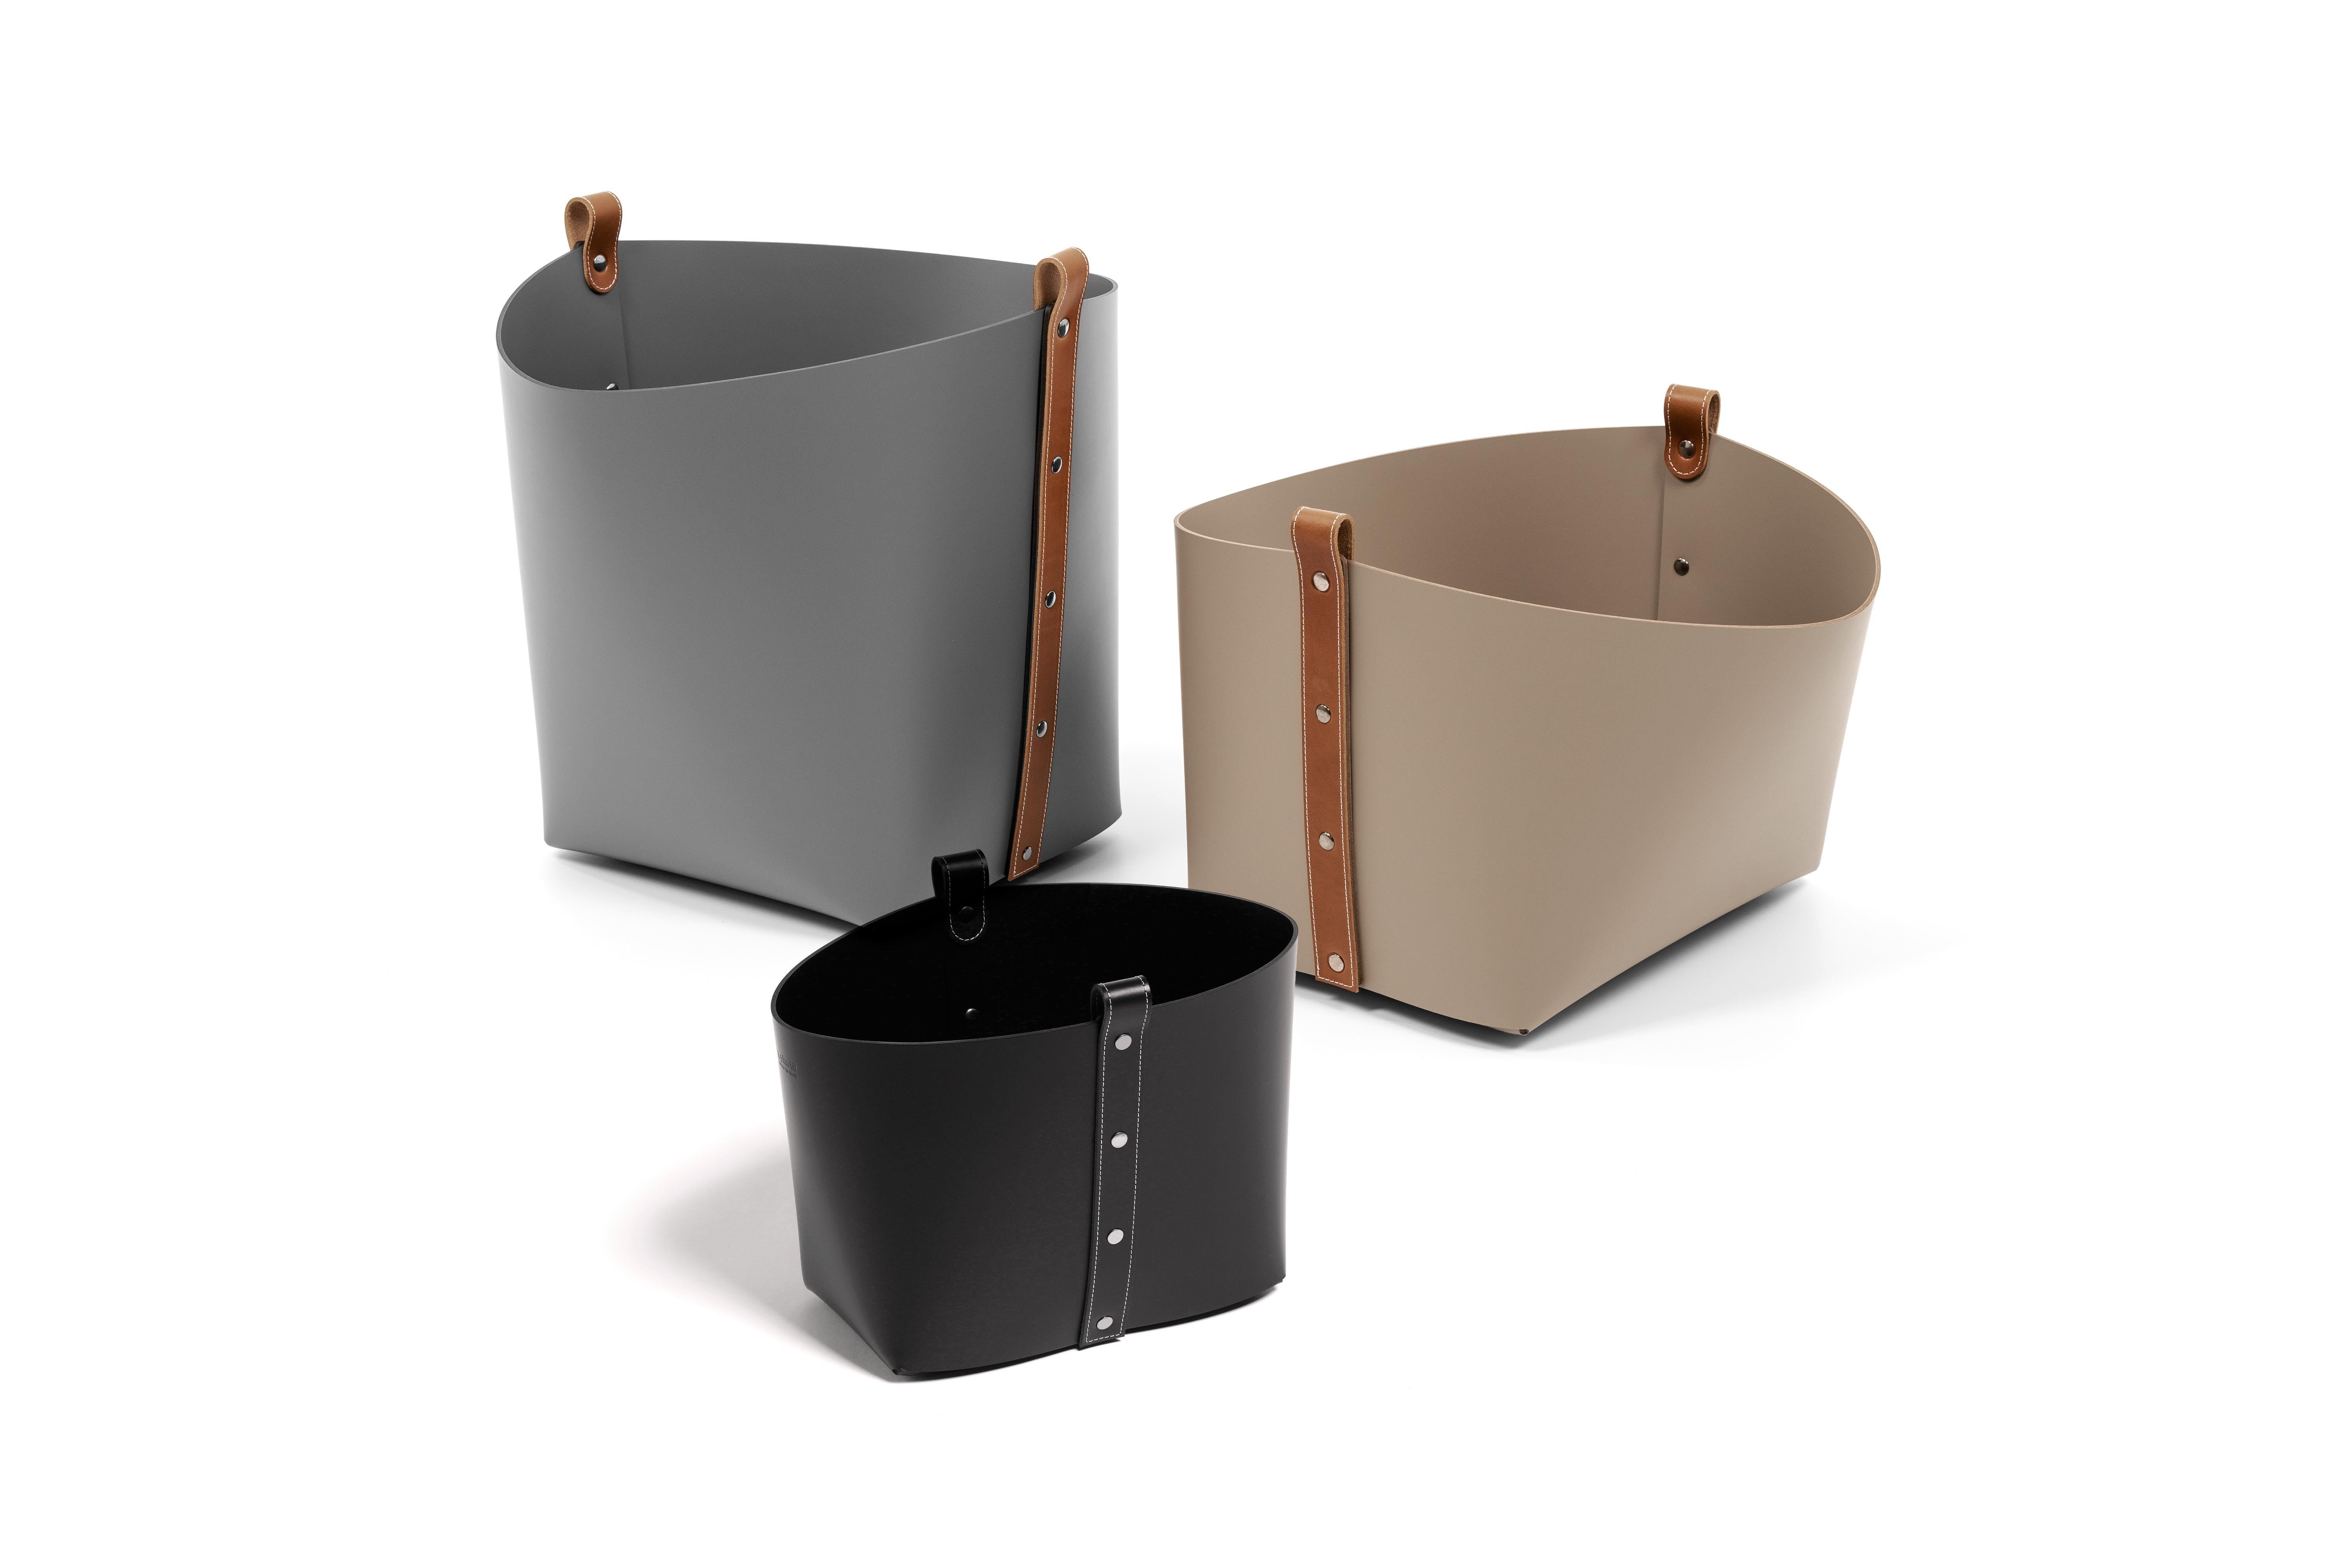 Ovo basket: Compact yet capacious.

Fashioned of resistant recycled leather, with tan or black this basket boasts an unstructured silhouette with flared sides supported by a sturdy rectangular base that can hold a large number of items. It might